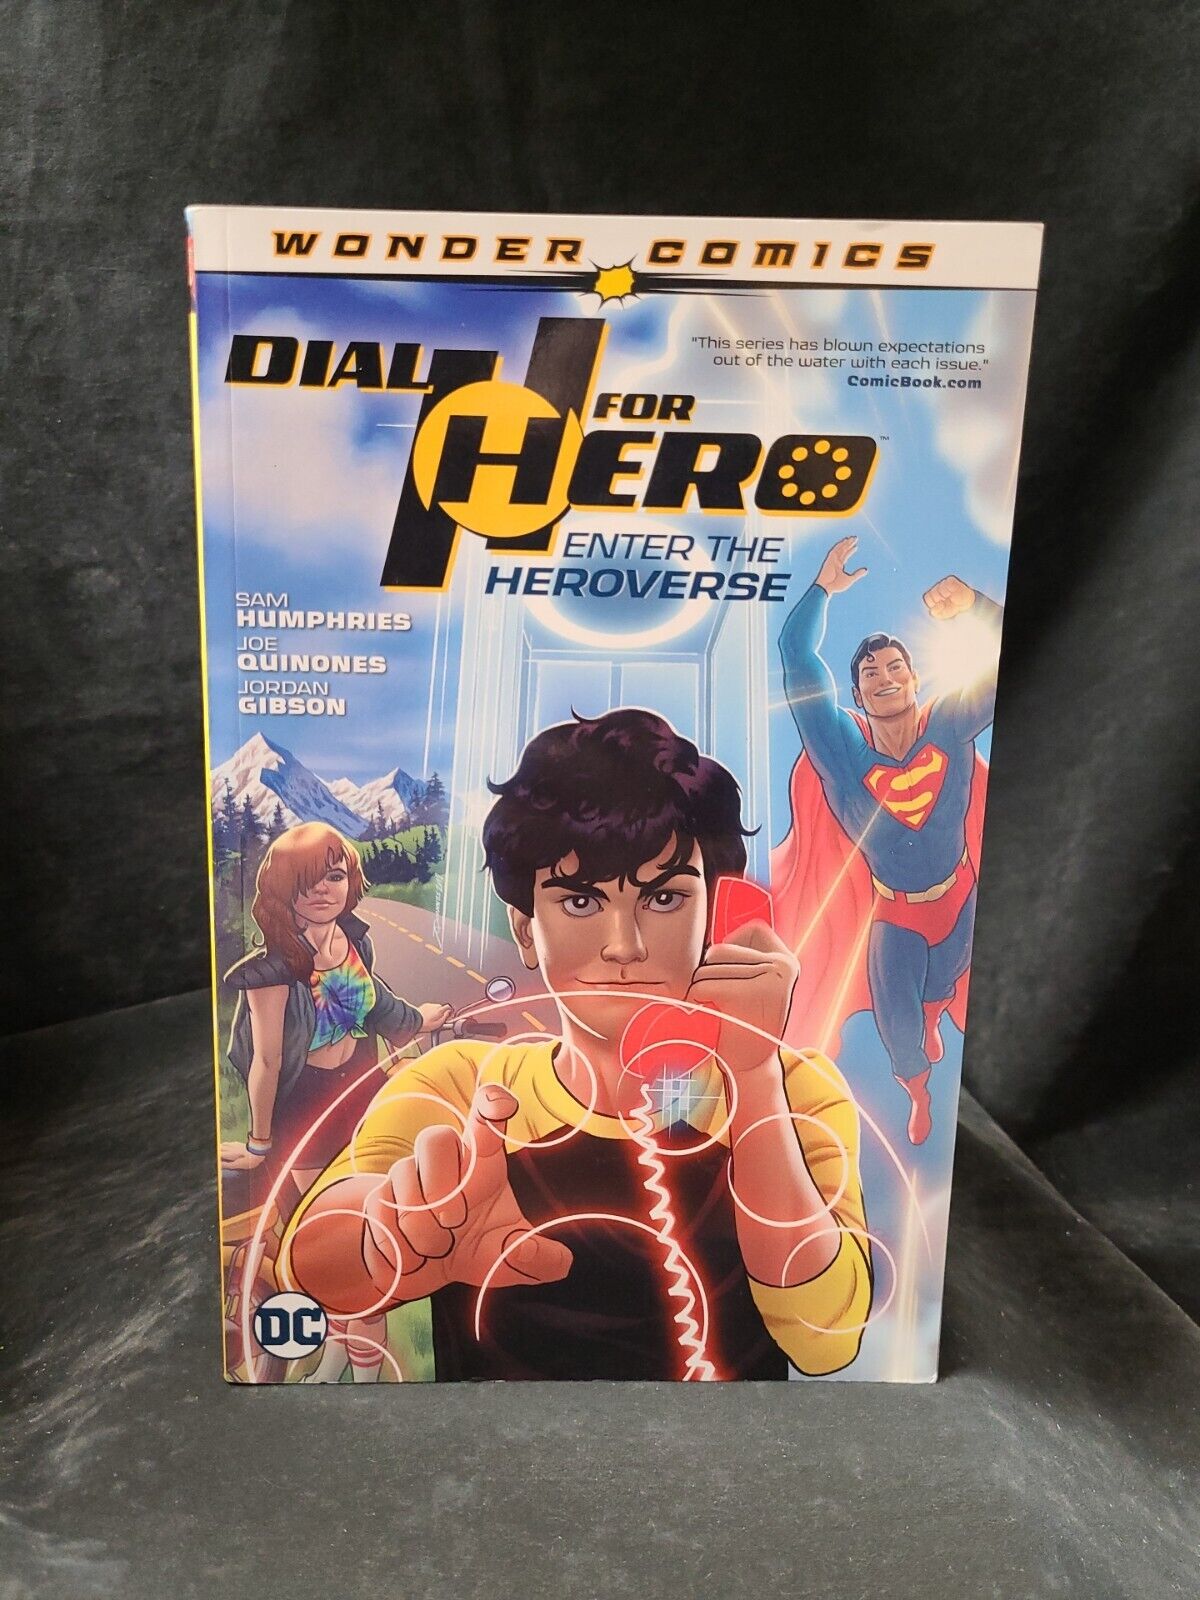 Dial H for Hero Vol 1 (DC Comics) Signed By Sam Humphries W/COA